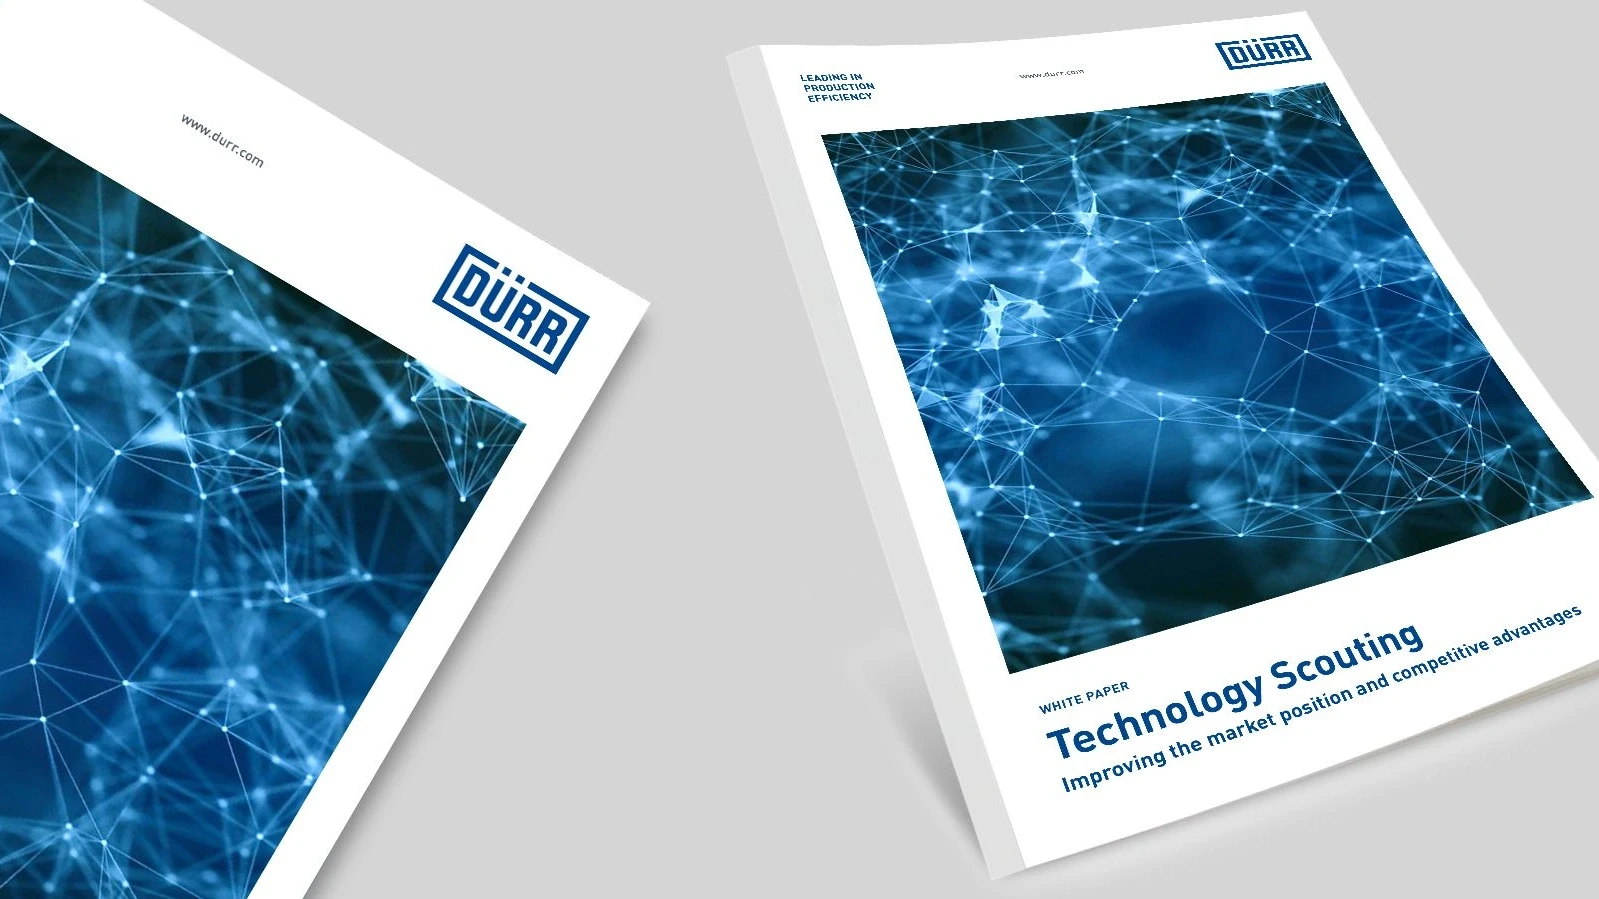 Dürr white paper for technology scouting